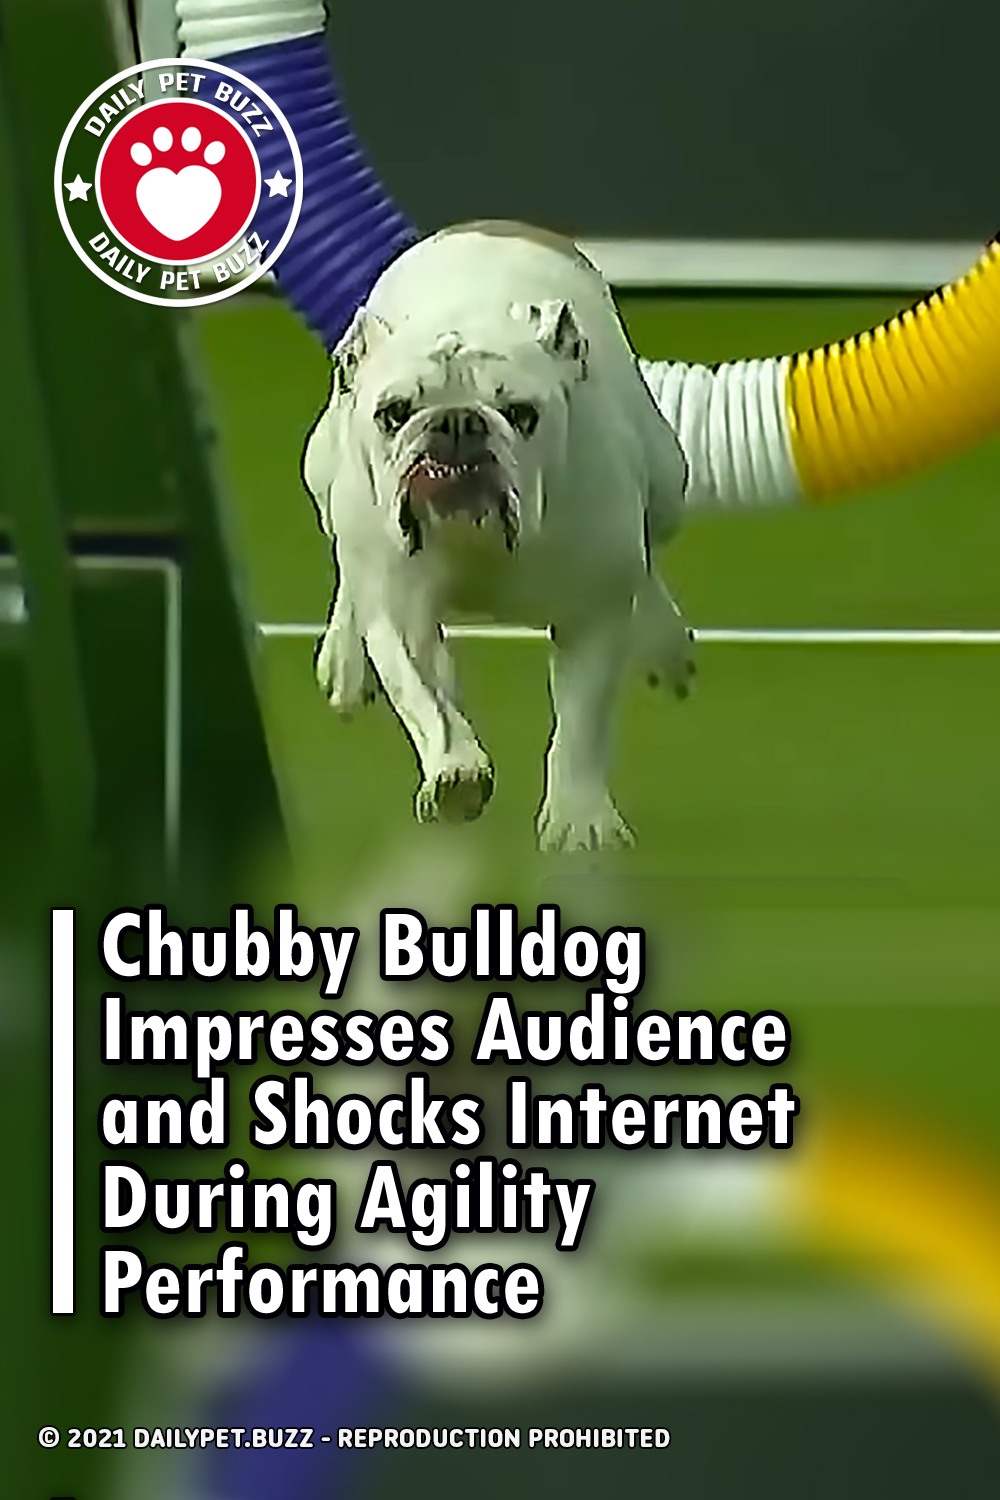 Chubby Bulldog Impresses Audience and Shocks Internet During Agility Performance